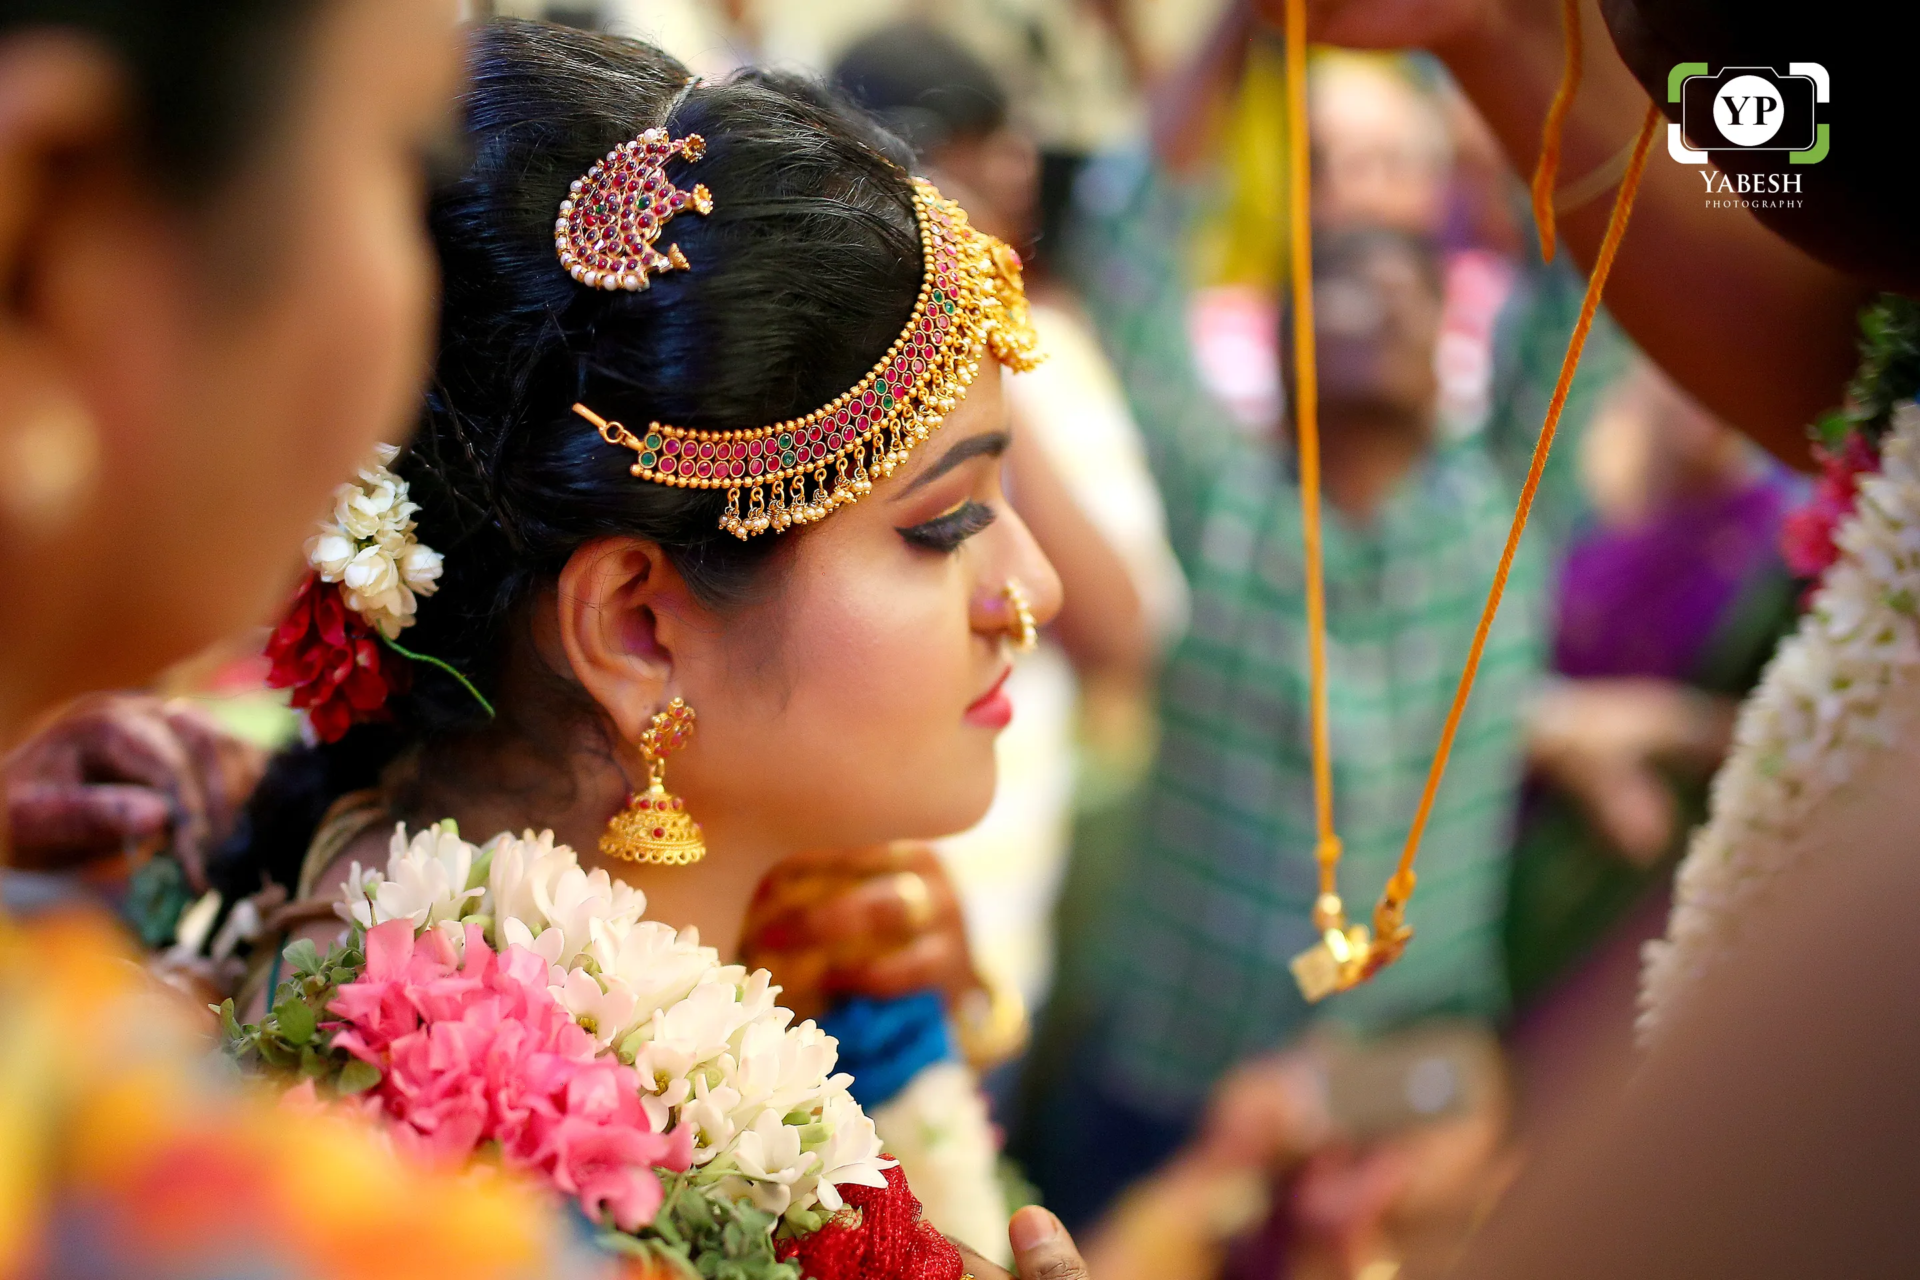 Elegant couple in traditional Brahmin wedding attire, captured by Yabesh Photography during a heartfelt ceremony